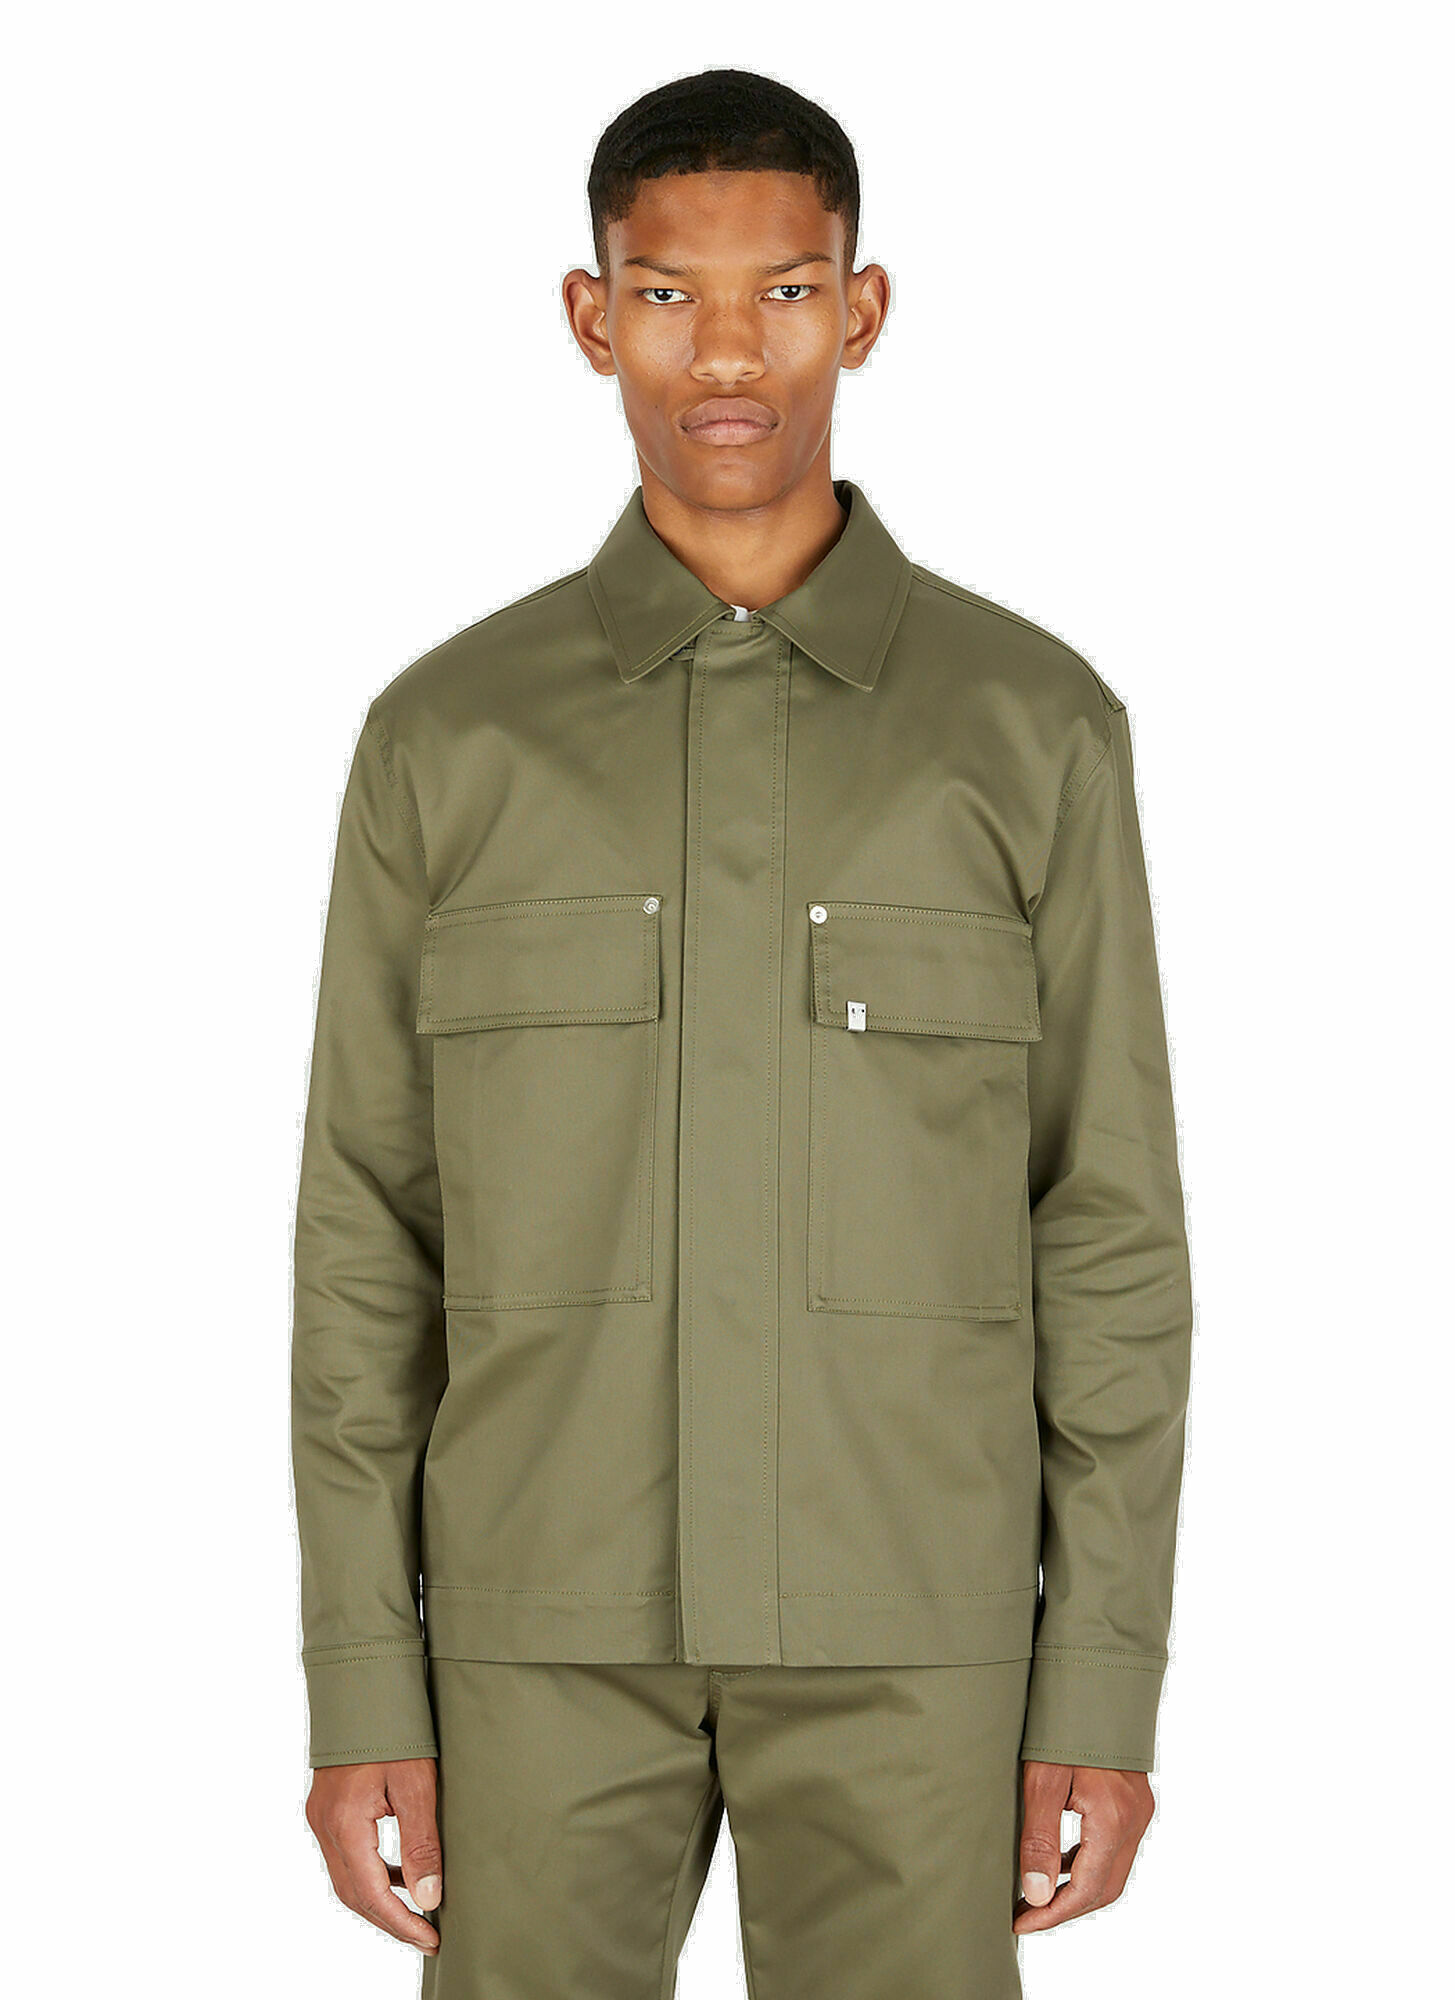 Photo: Military Jacket in Green